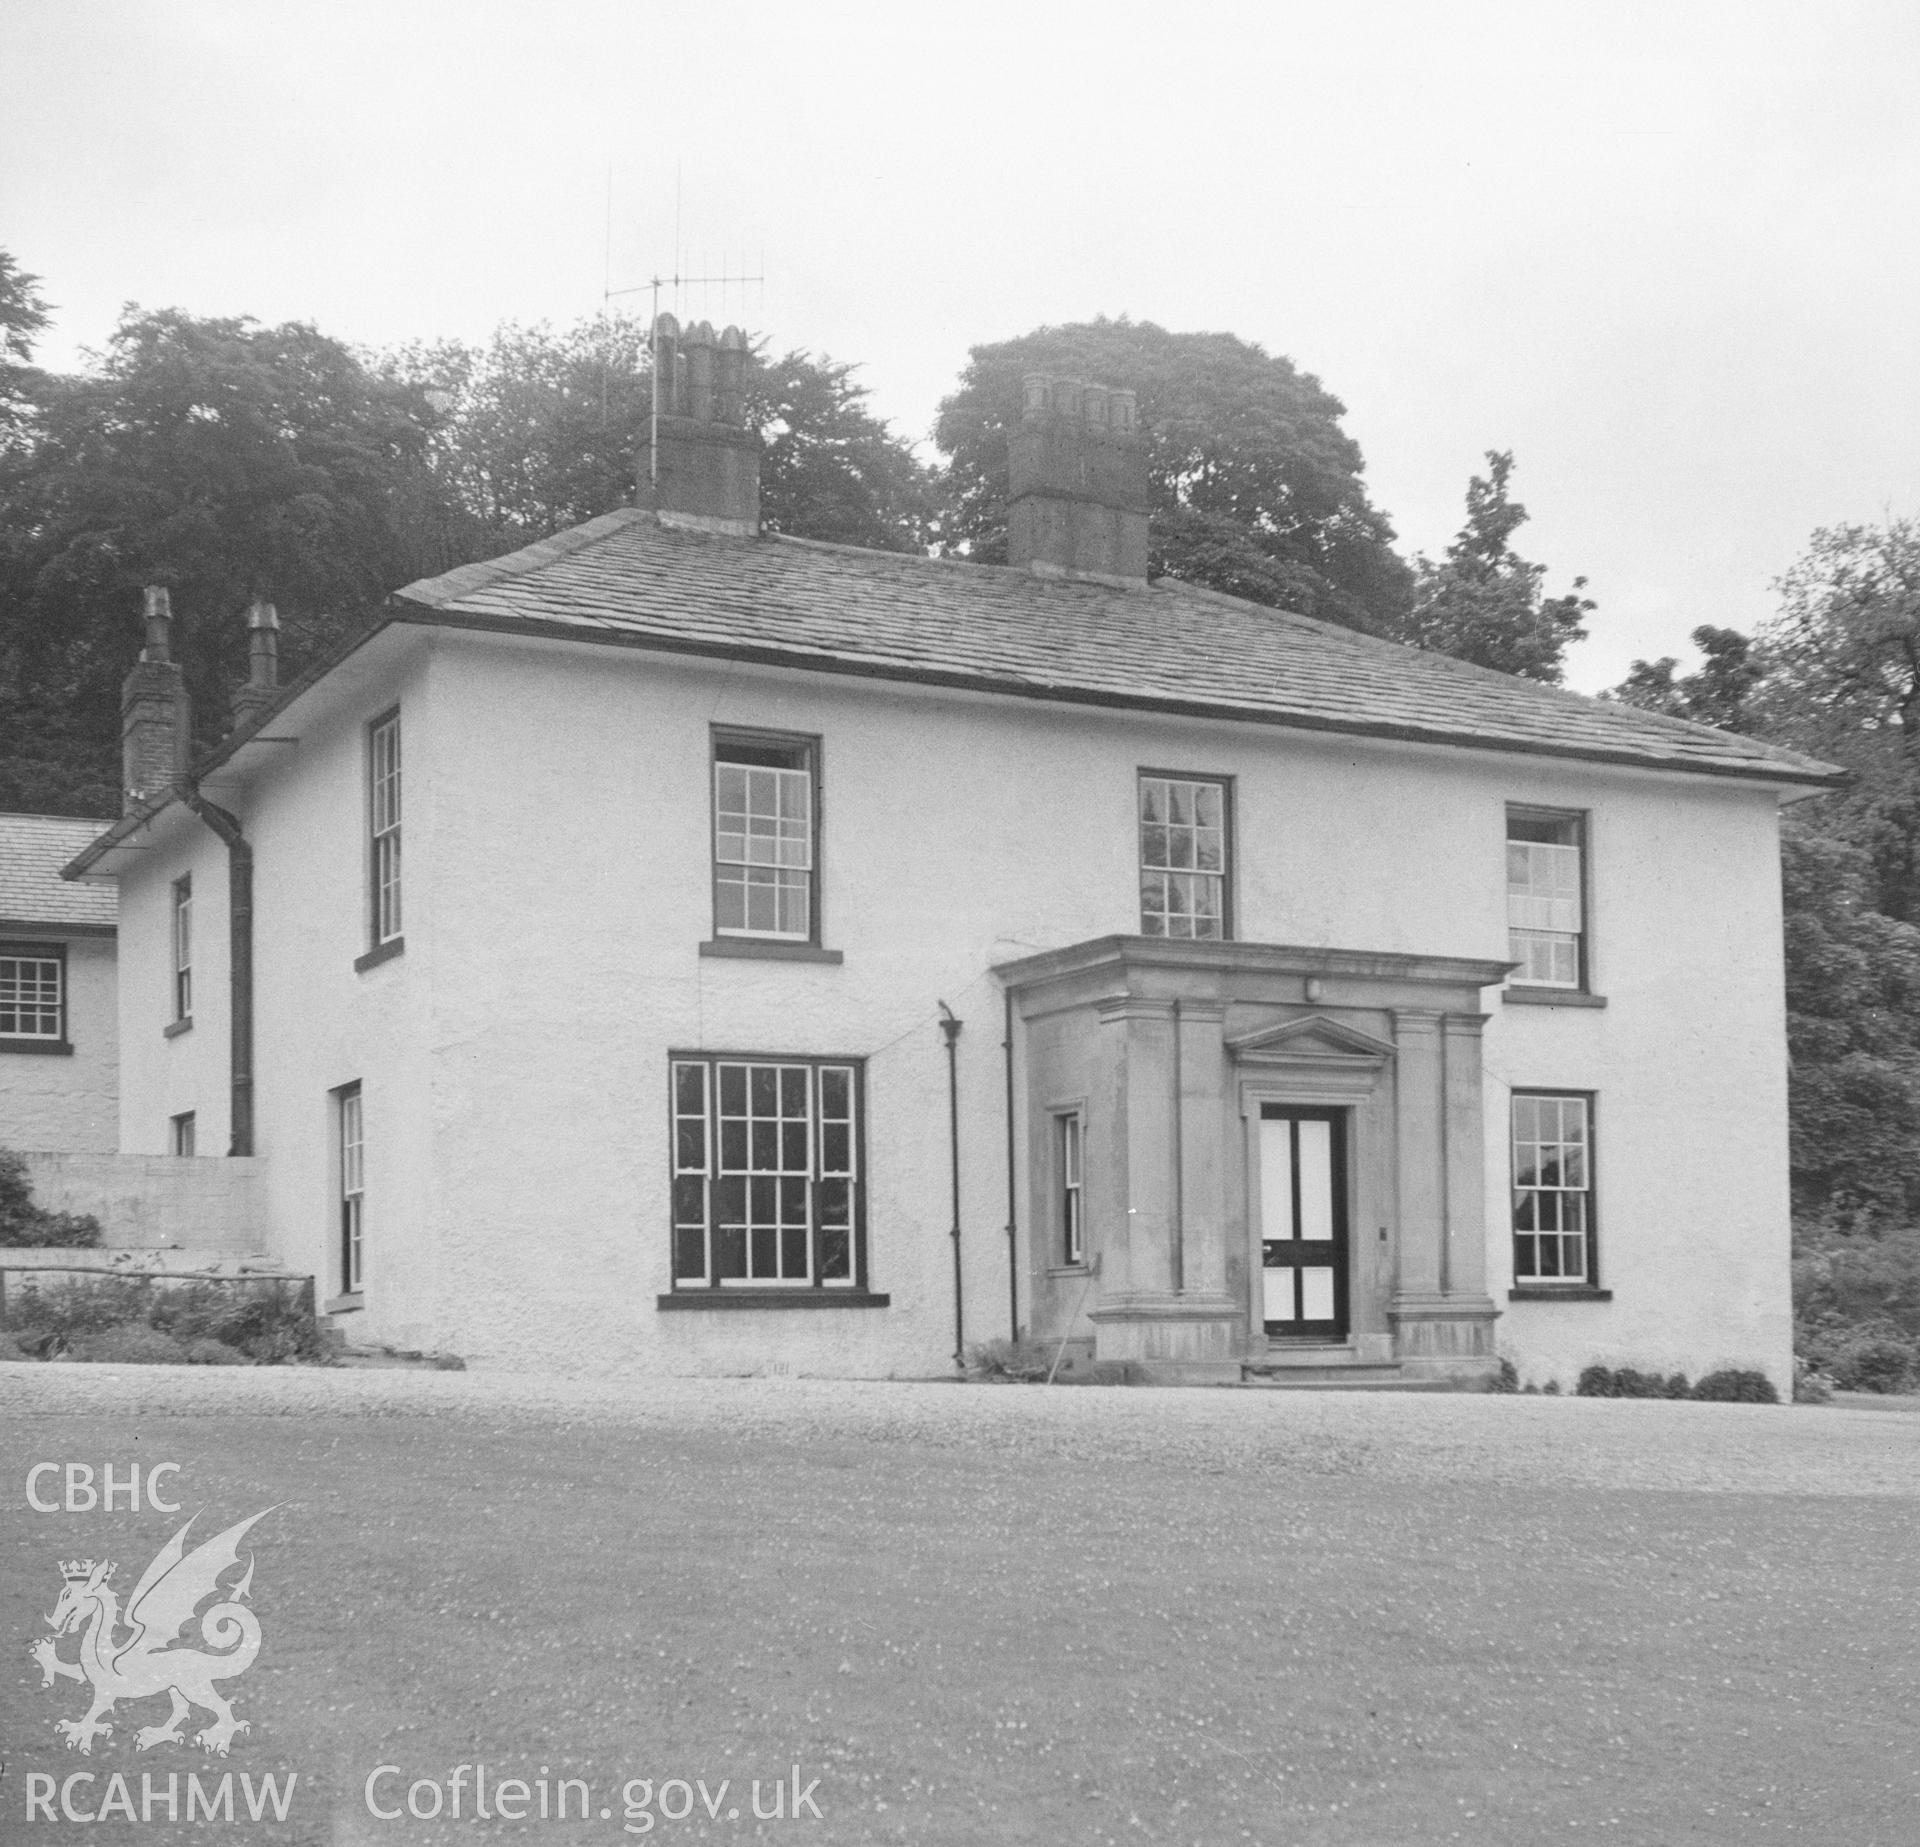 Digital copy of a black and white nitrate negative showing exterior view of Hafod, Gwernymynydd.